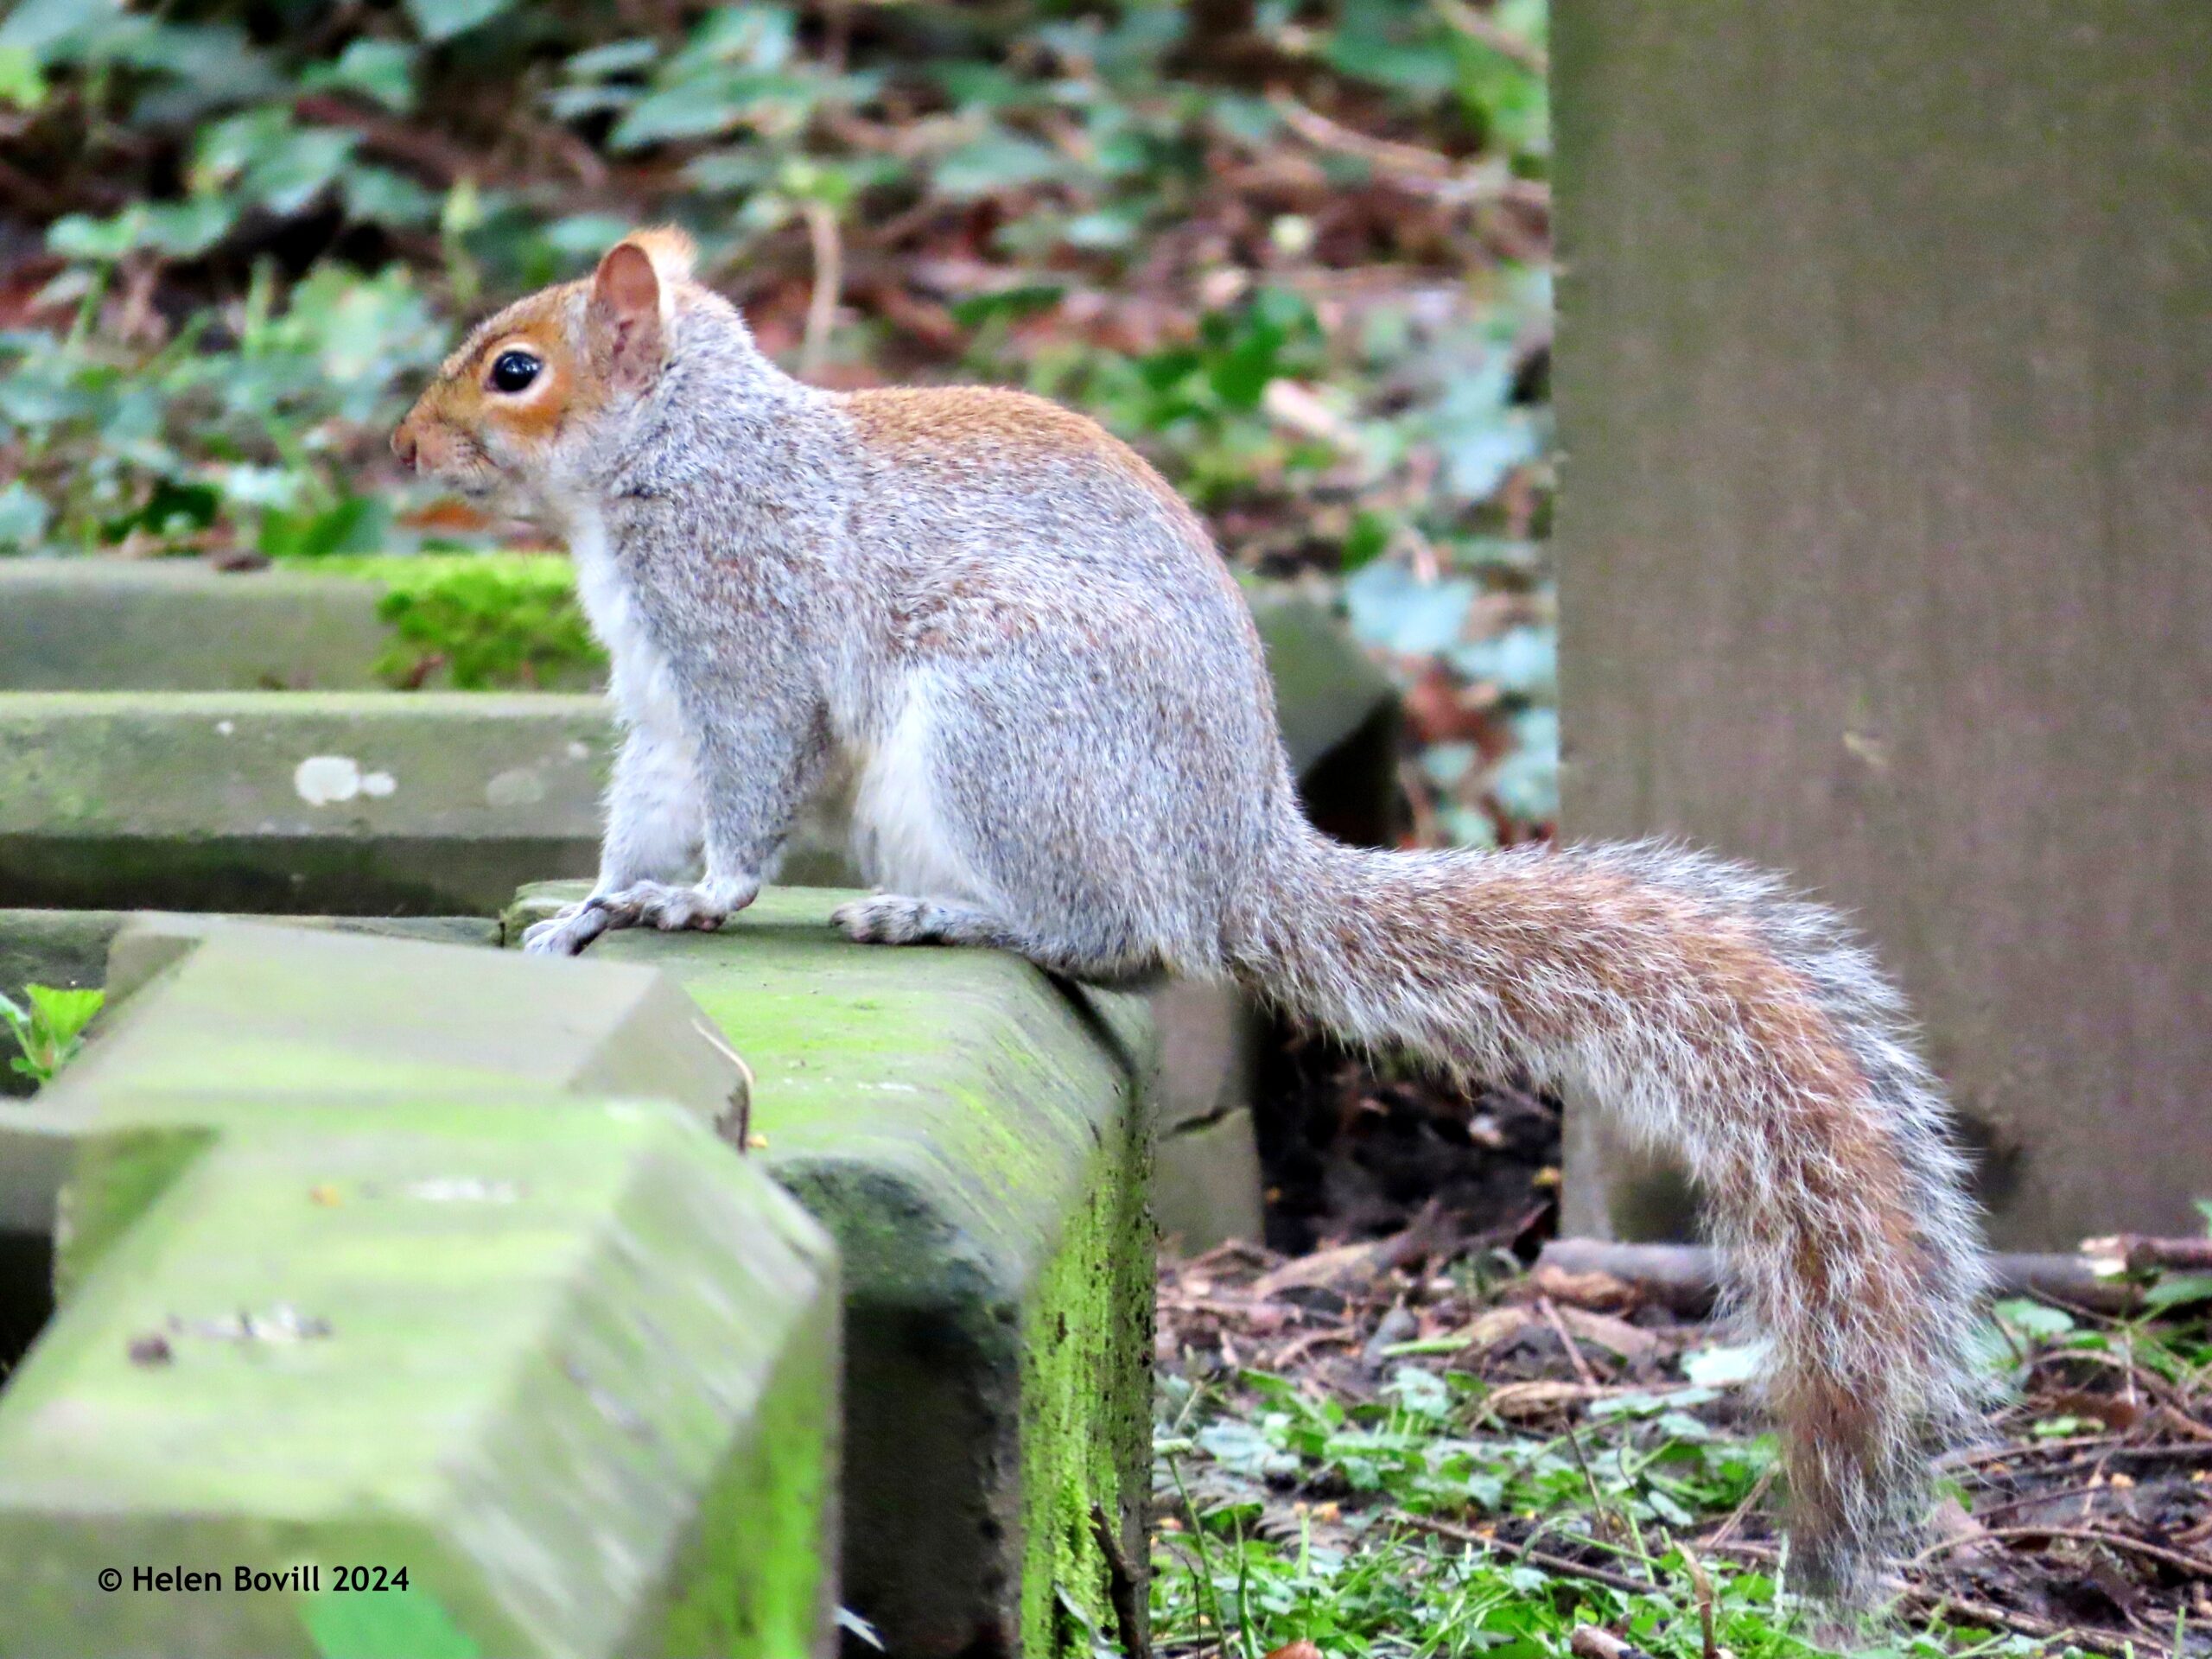 A squirrel sitting on a graveside kerb in the cemetery